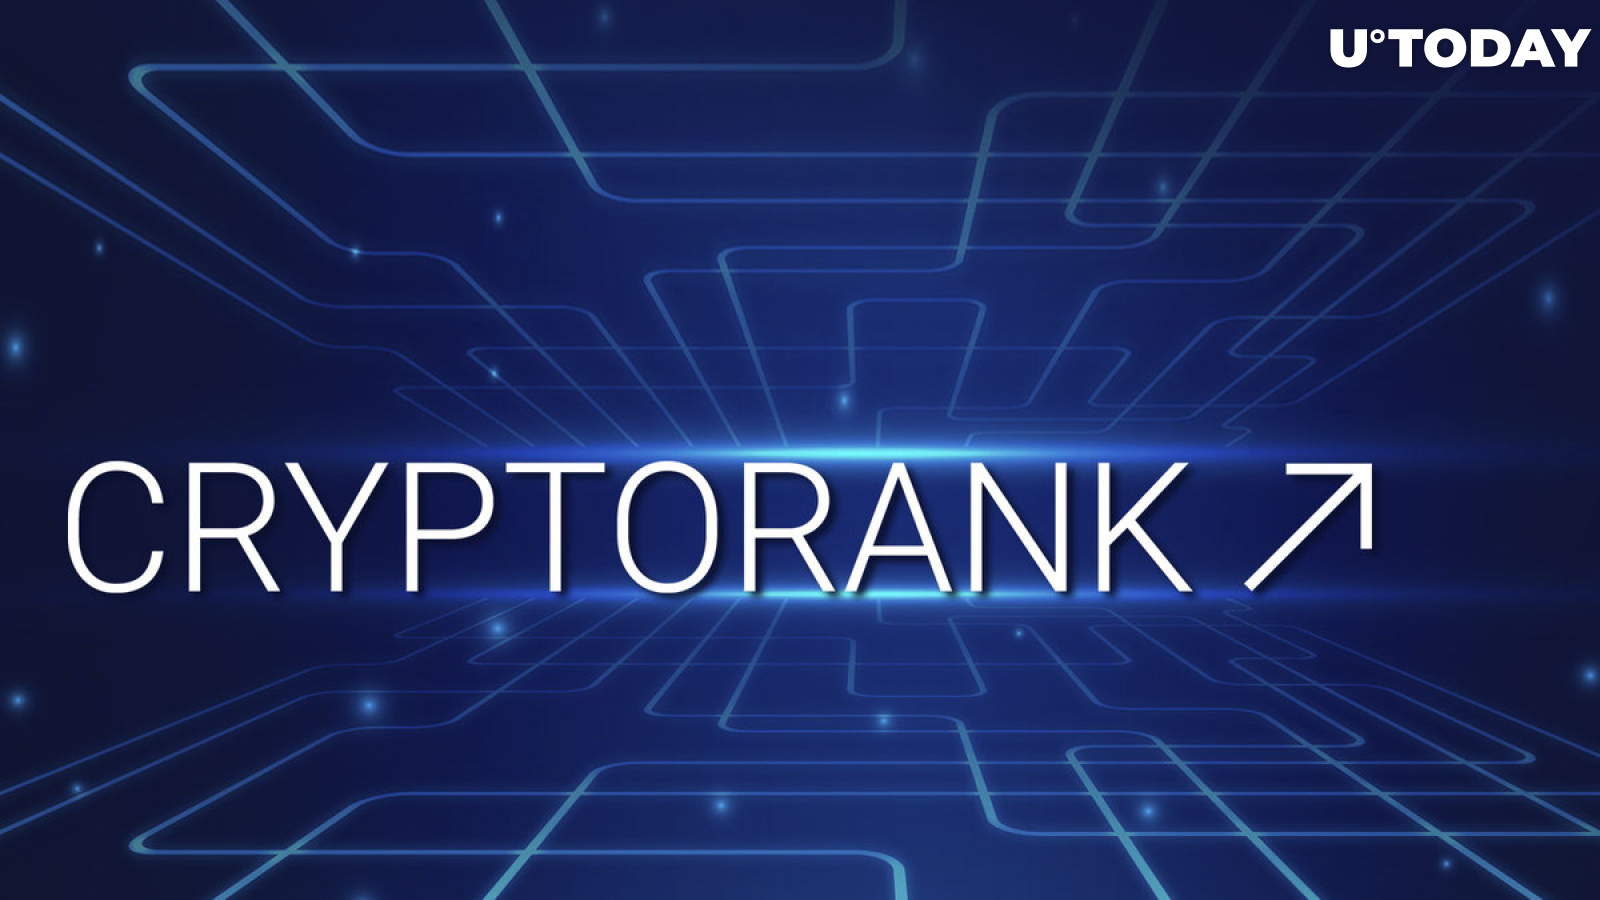 CryptoRank Publishes Review of Decentralized Perpetual Exchanges: Details